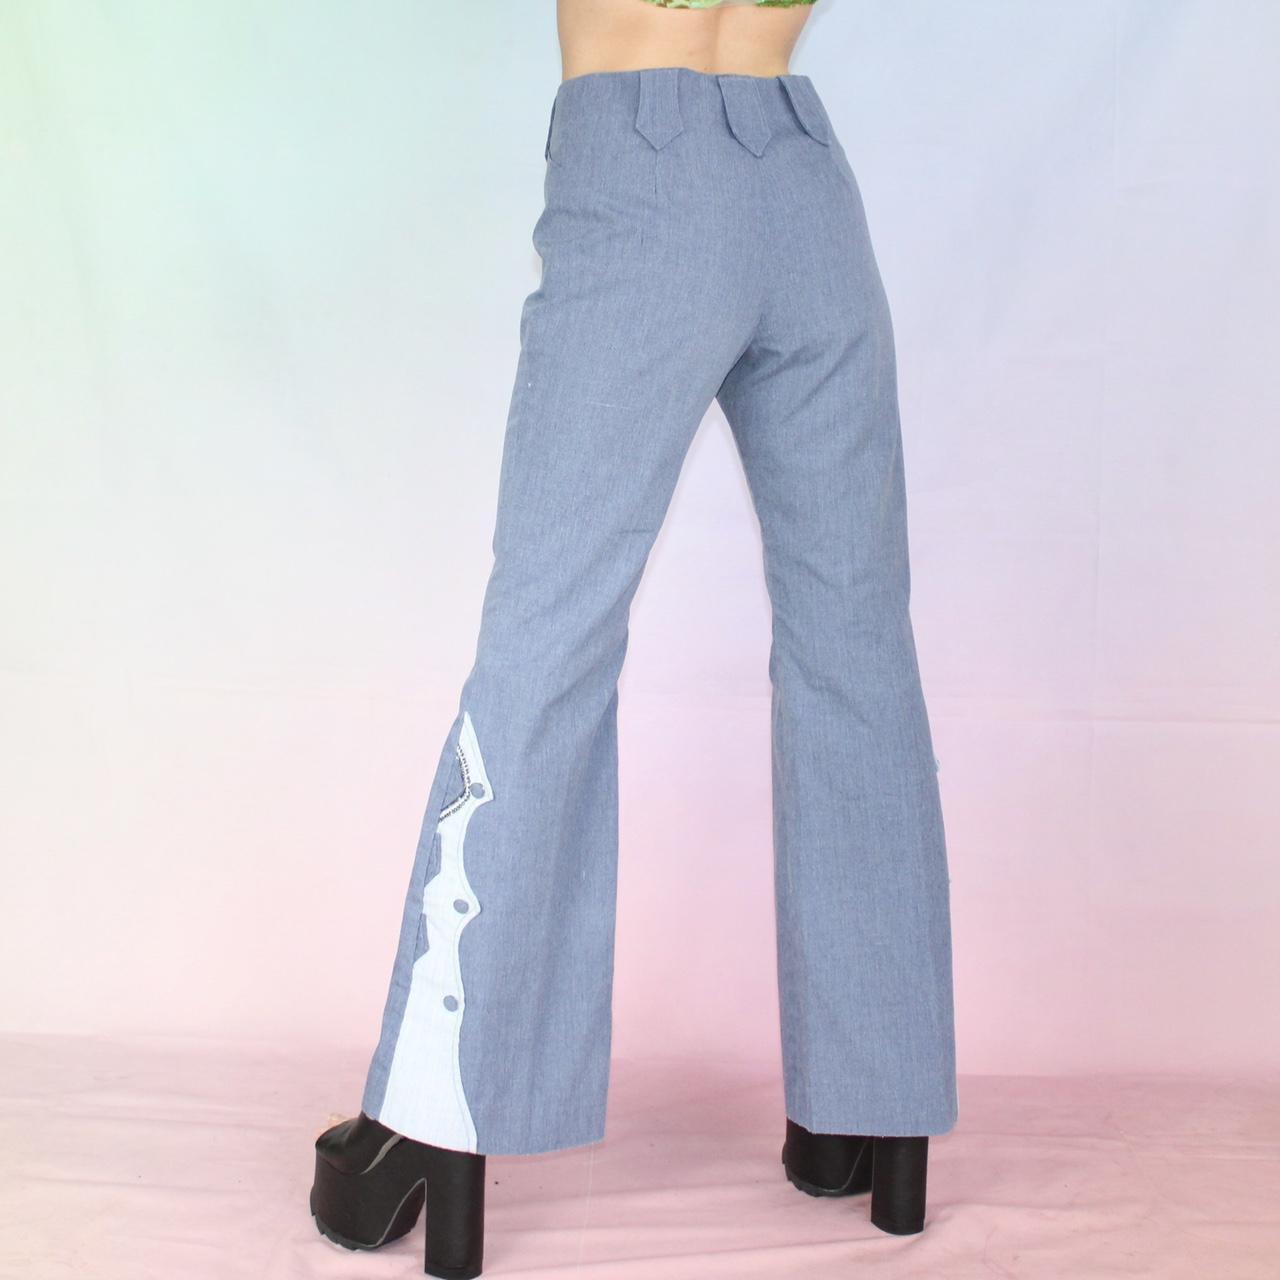 Buy 1970s Bell Bottom Jeans 70s Bellbottoms High Waisted Jeans